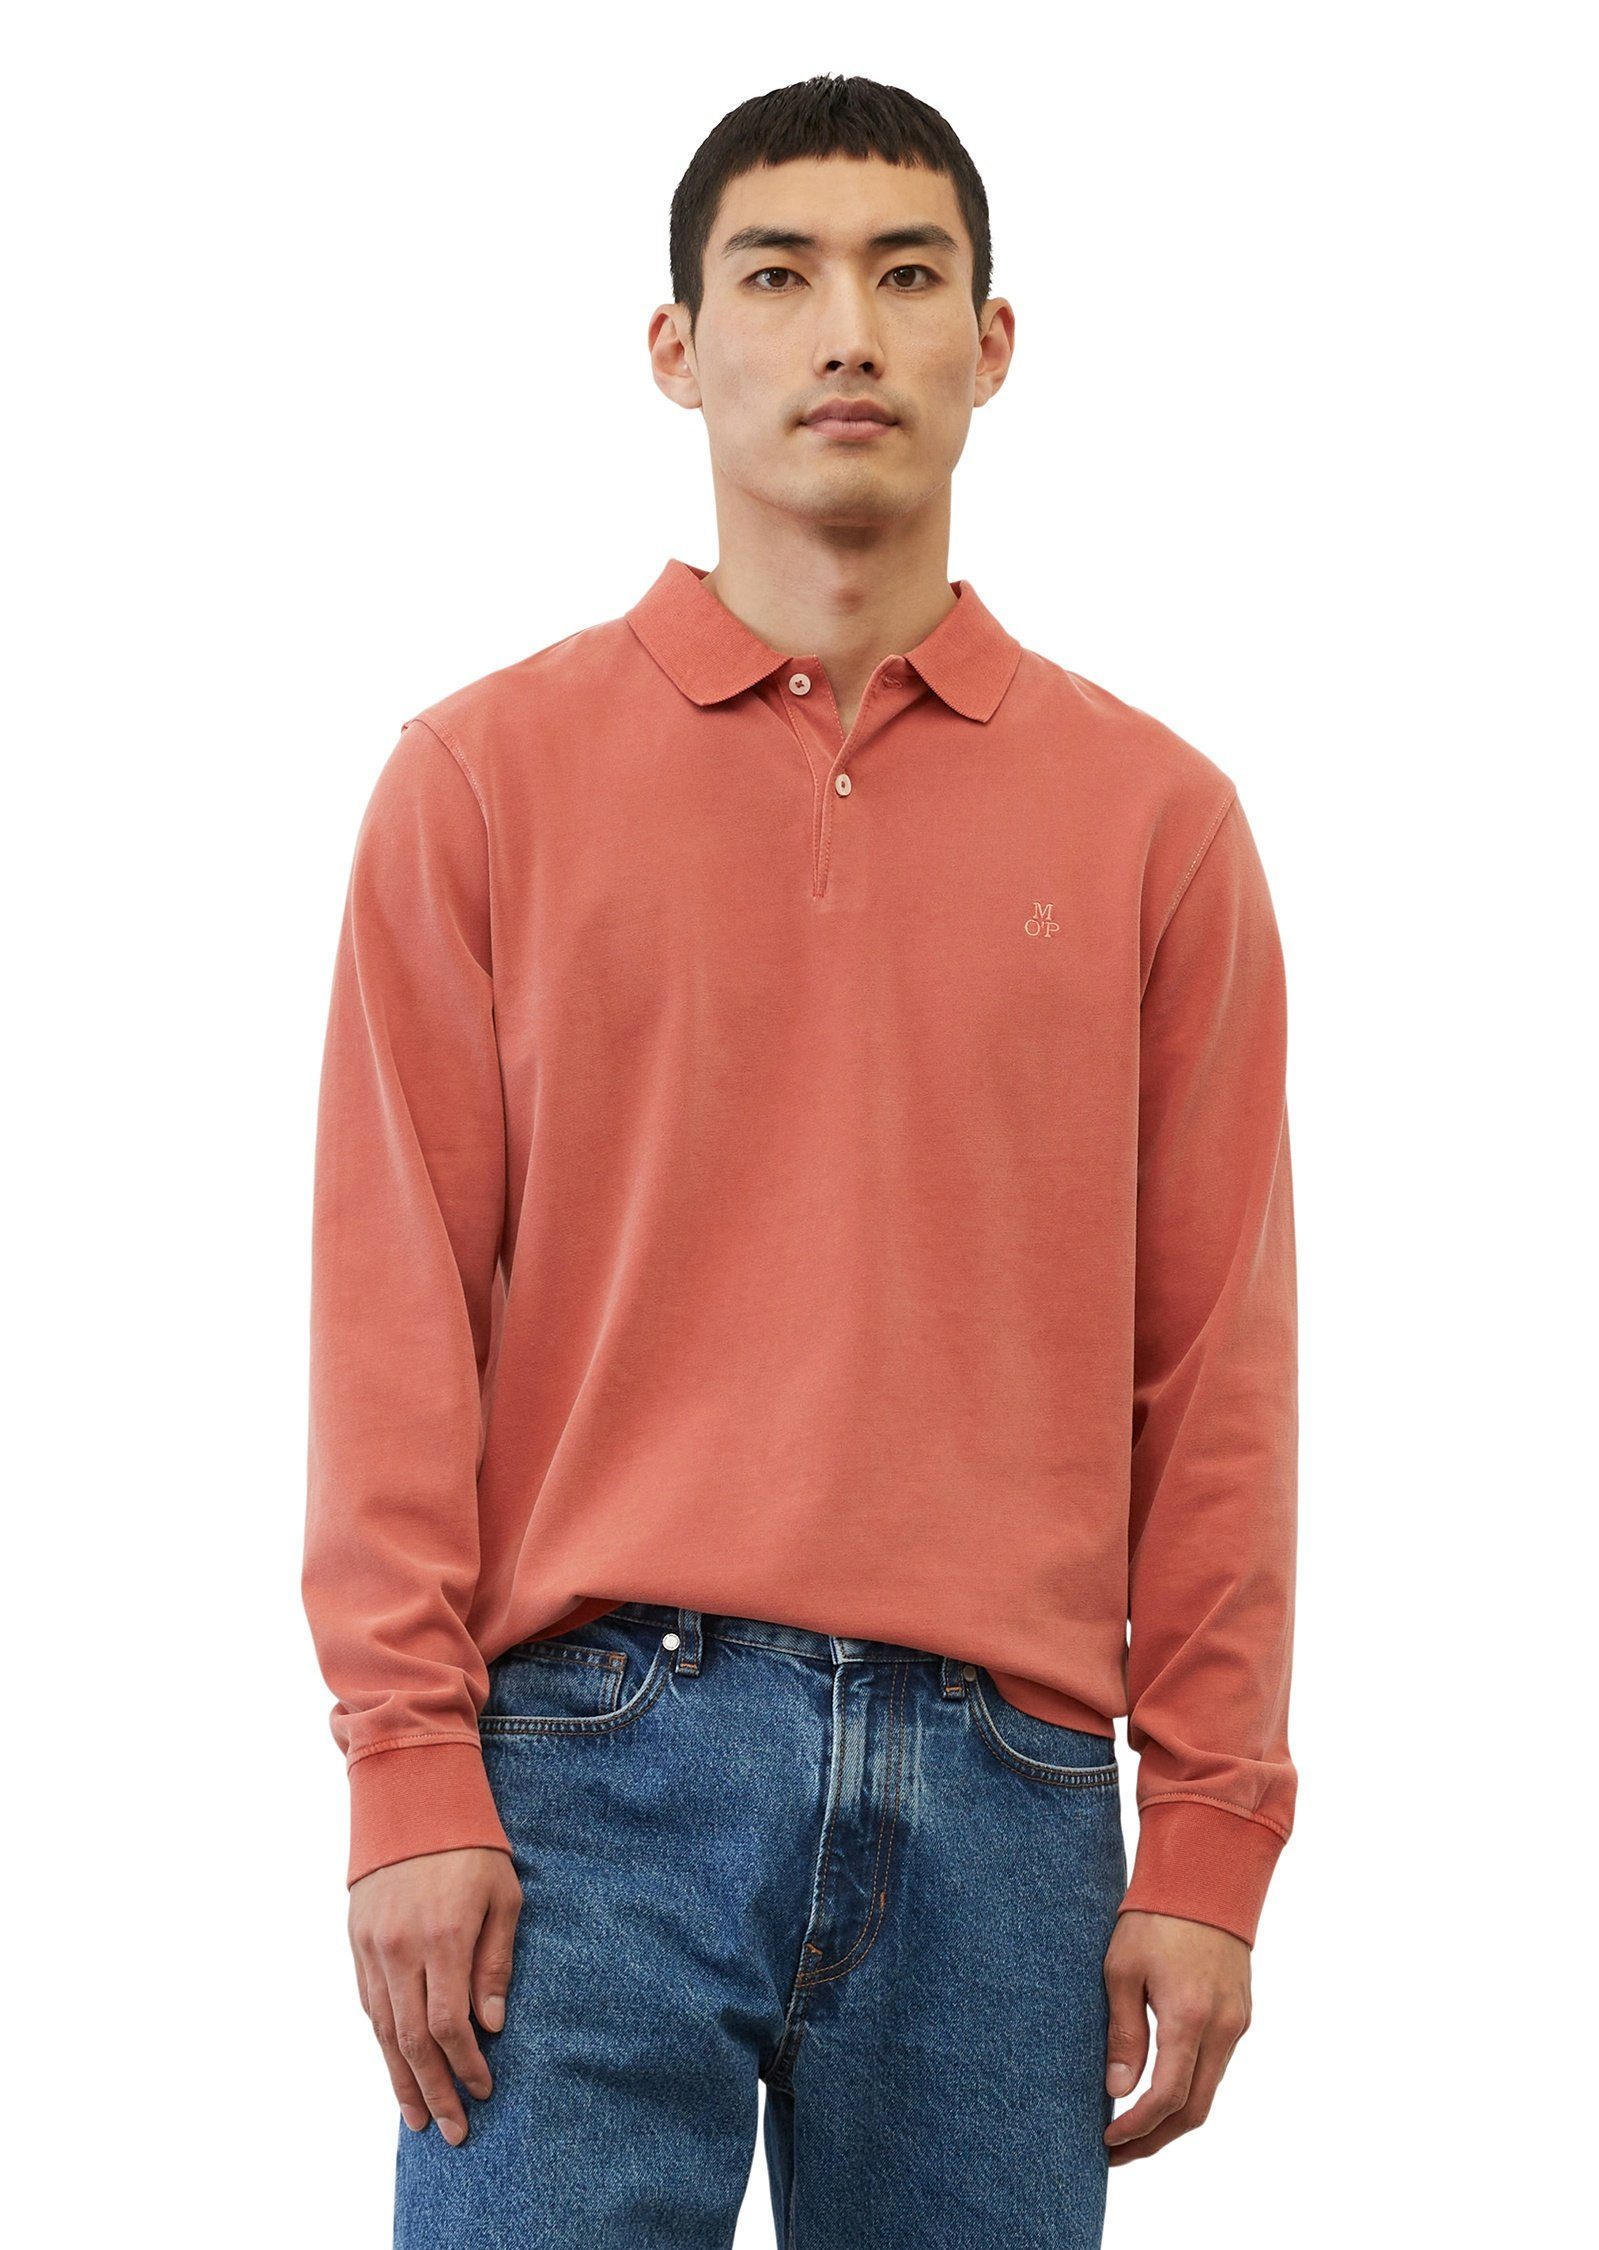 Marc O'Polo Langarm-Poloshirt in Soft-Touch-Jersey-Qualität rot